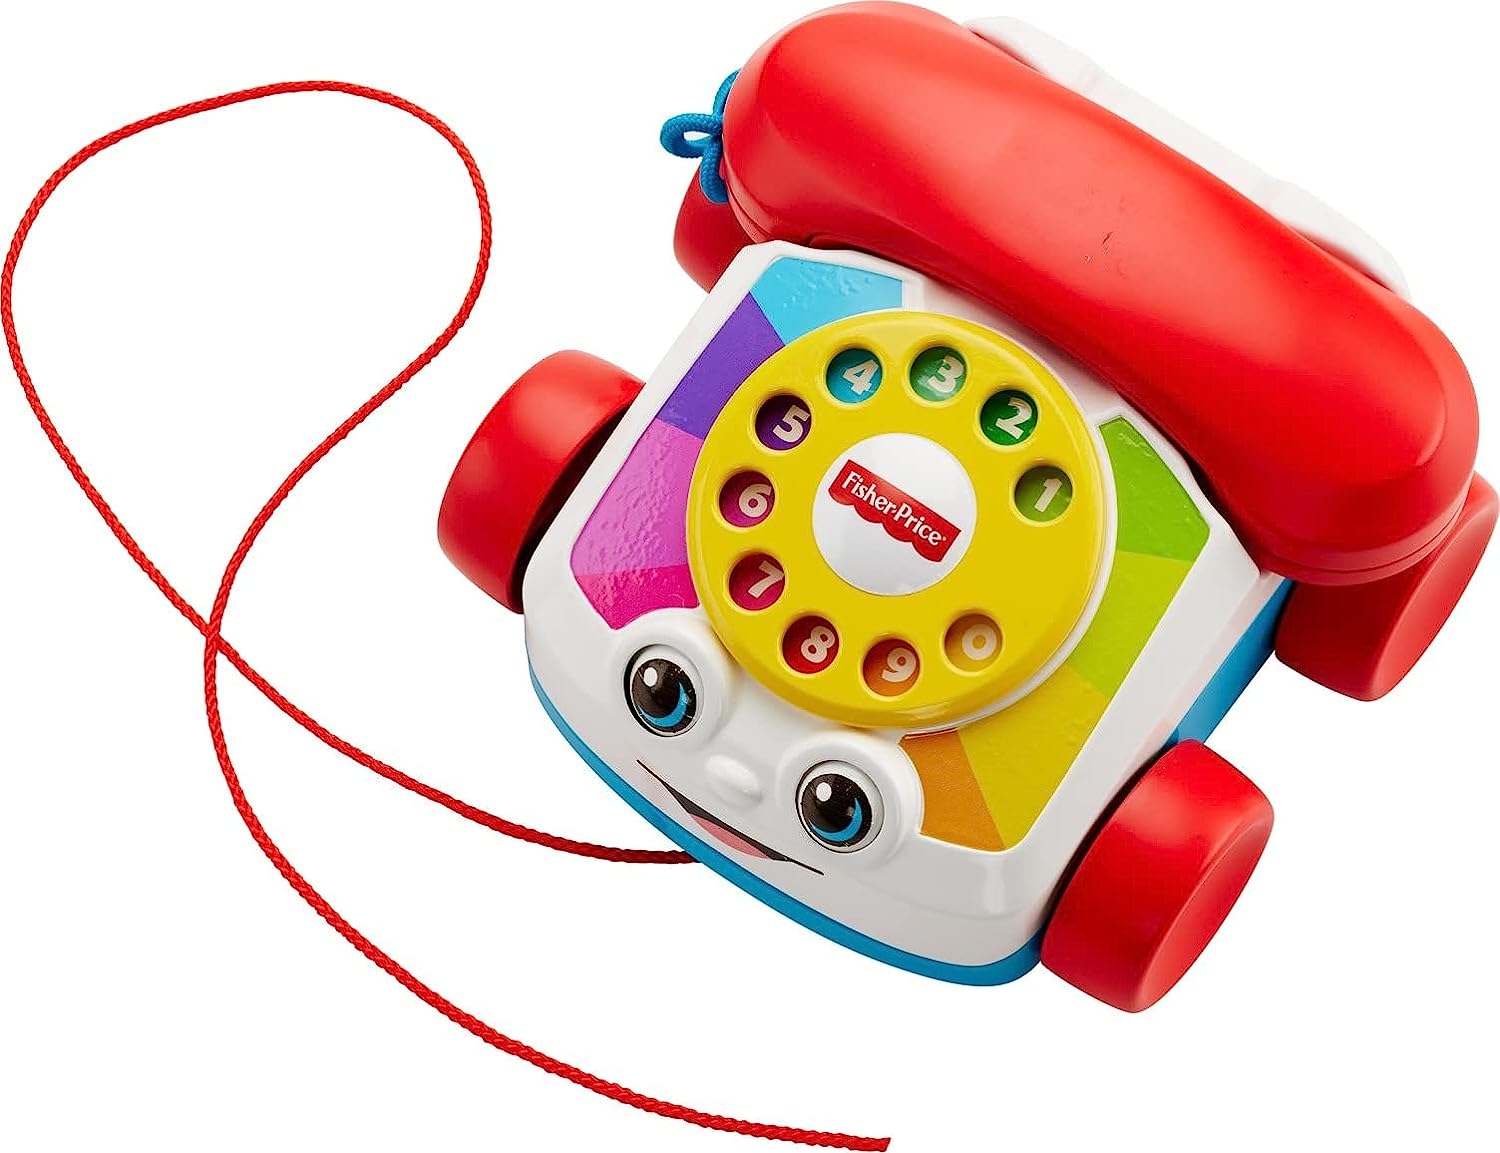 Fisher-Price Toddler Pull Toy Chatter Telephone Pretend Phone With Rotary Dial And Wheels For Walking Play Ages 1+ Years